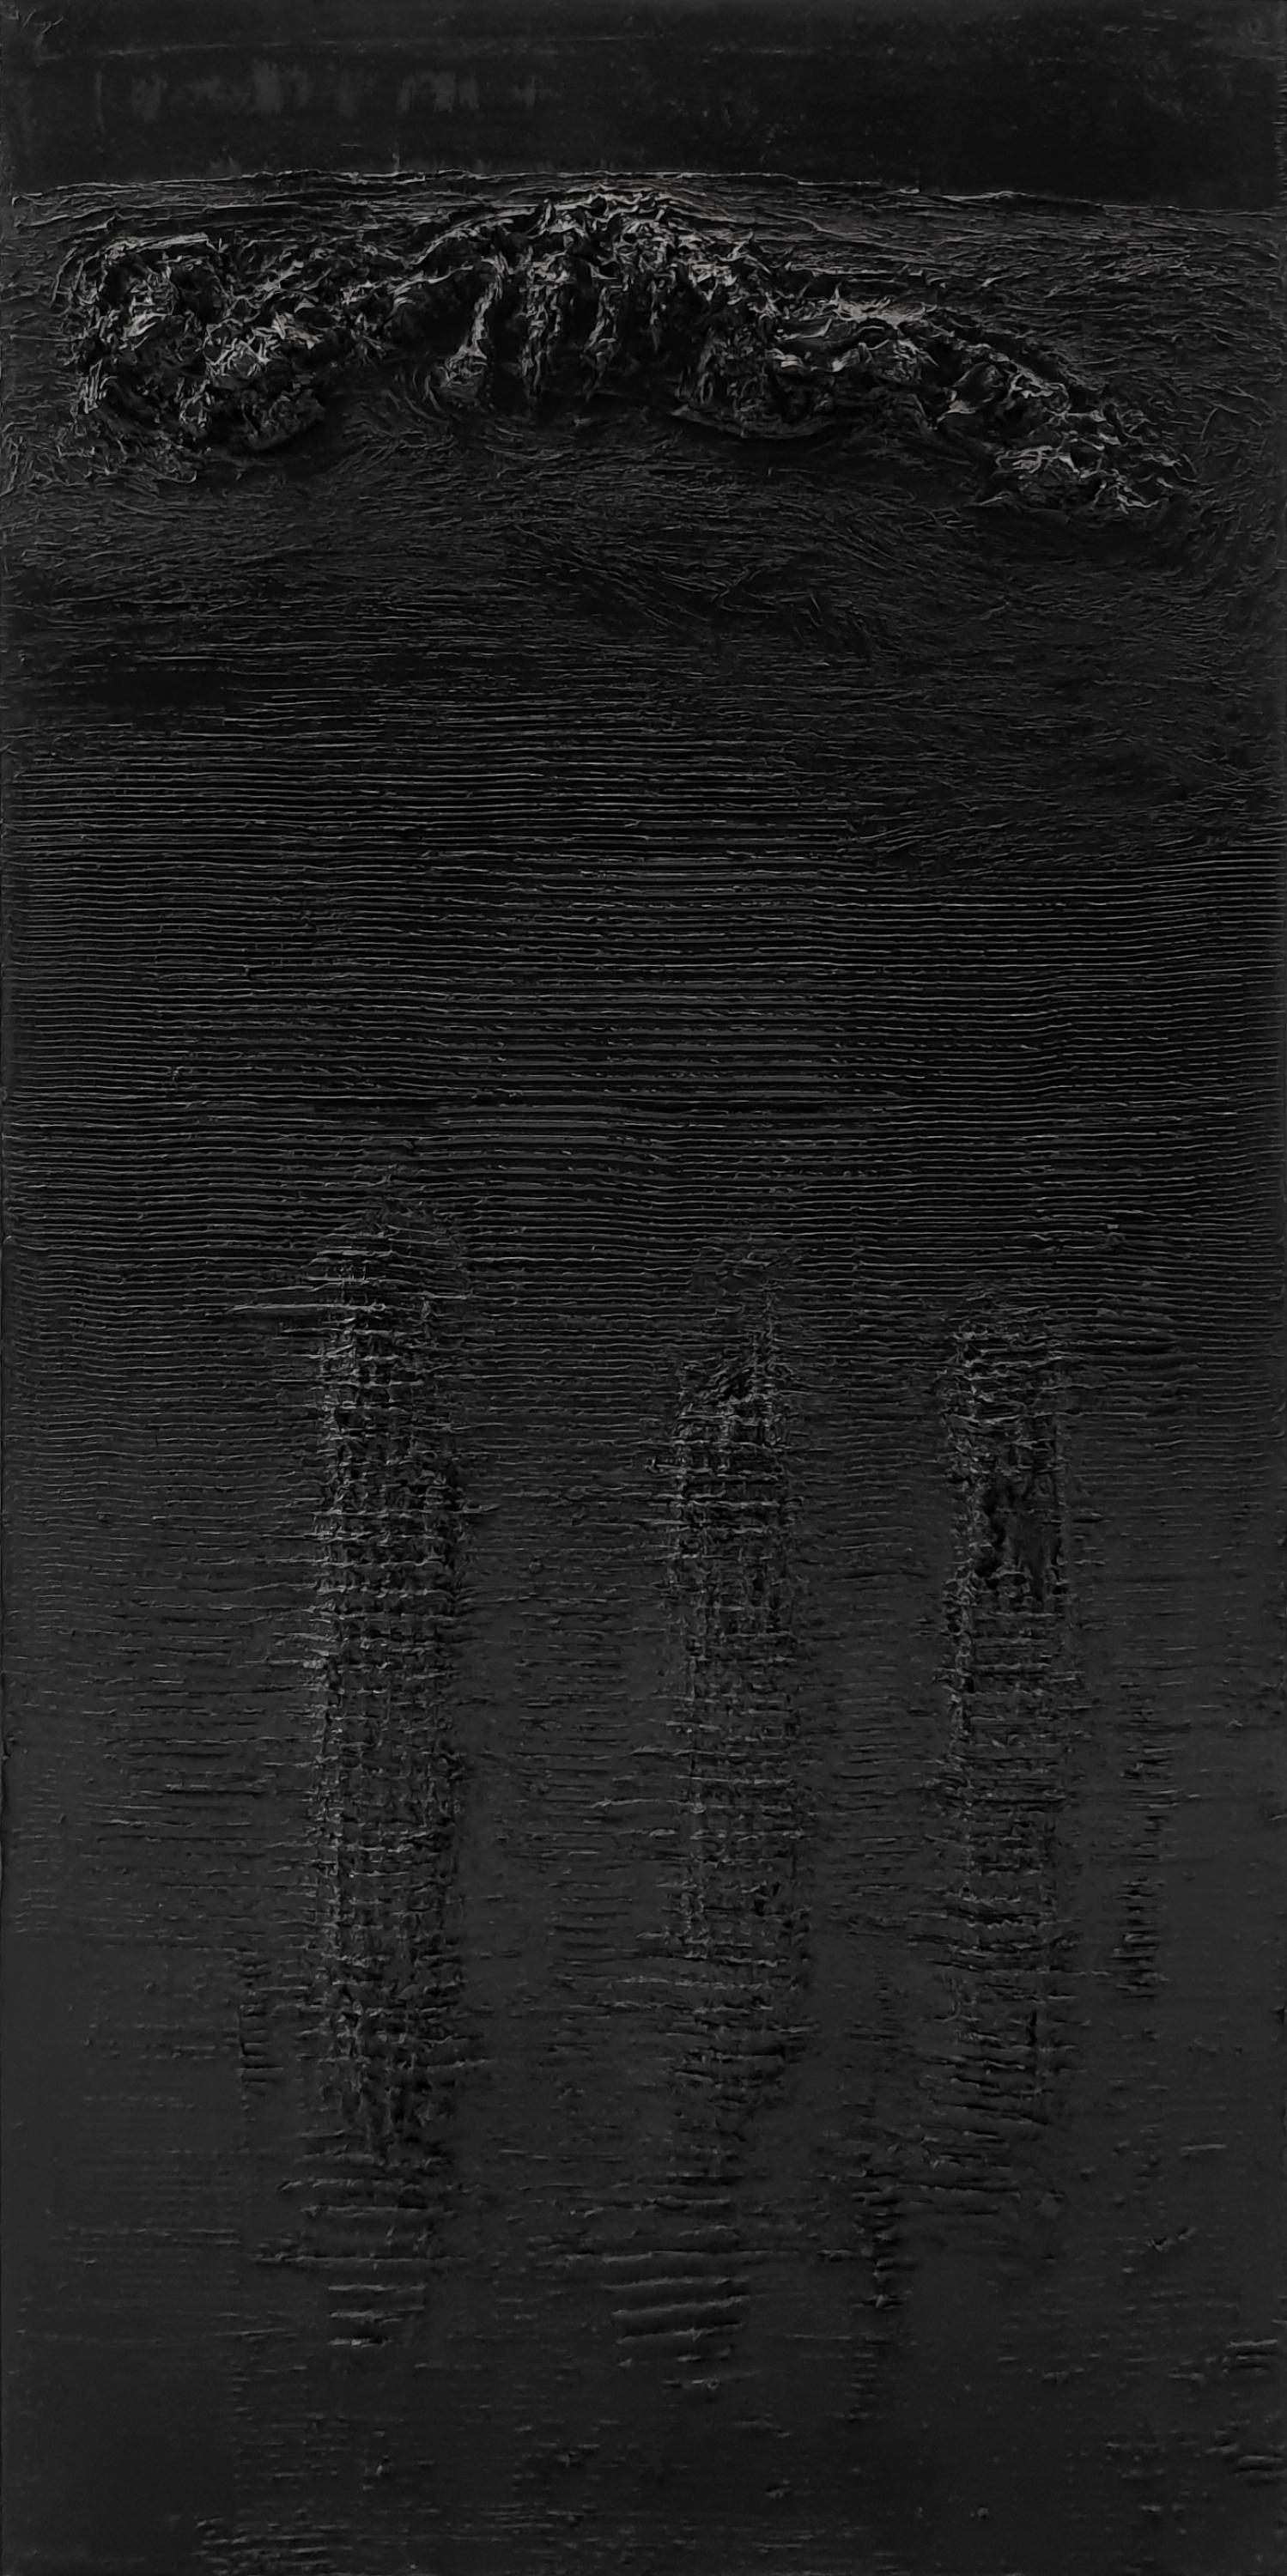 Zsolt Berszán Landscape Painting - Untitled 4 - Contemporary, Black, Monochrome, Abstract Painting, Organic, Life